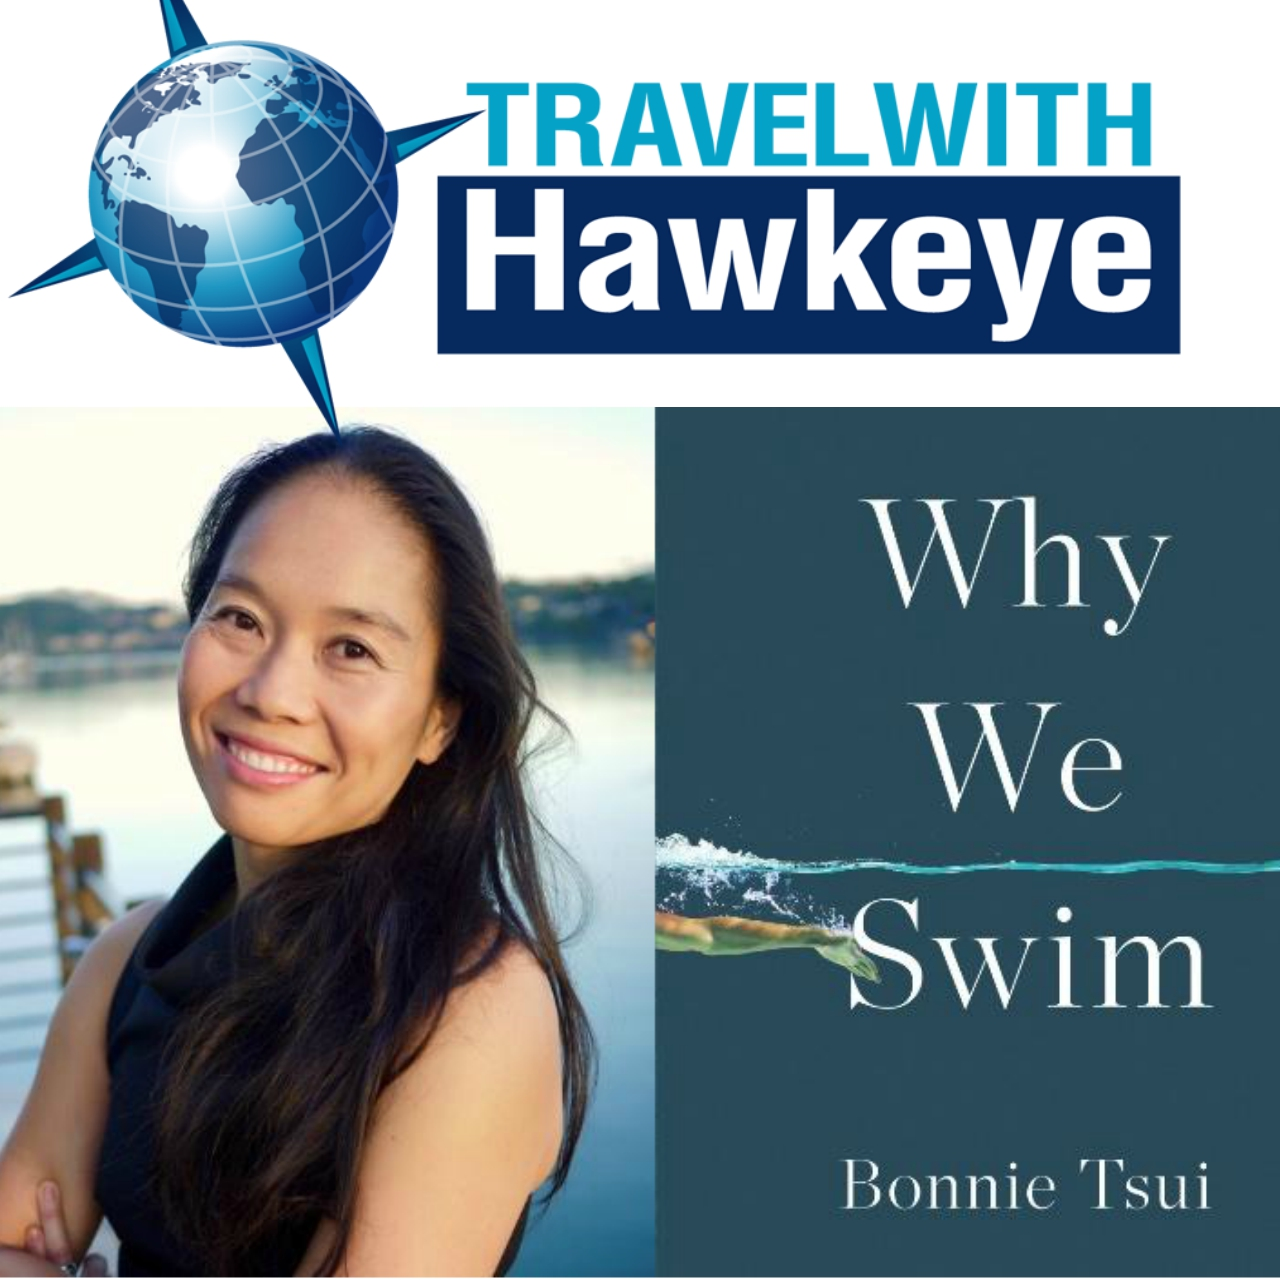 We chat with travel writer Bonnie Tsui on her new book “Why We Swim”